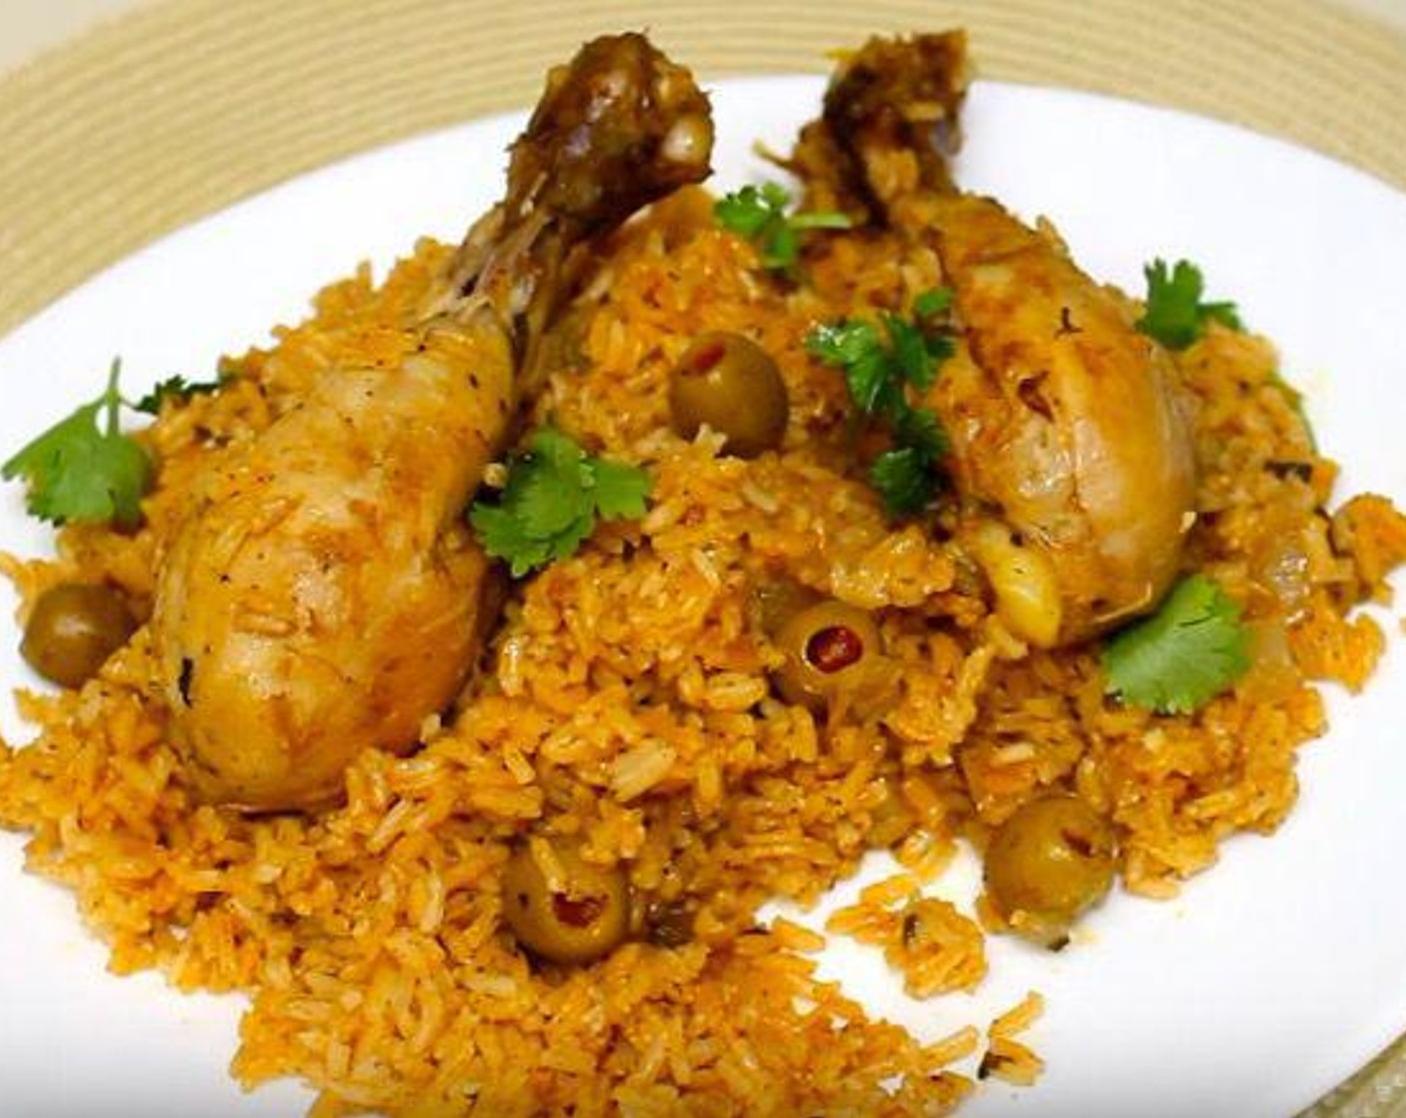  Tender Chicken, fragrant rice, and green olives come together in harmony to make this comforting meal.